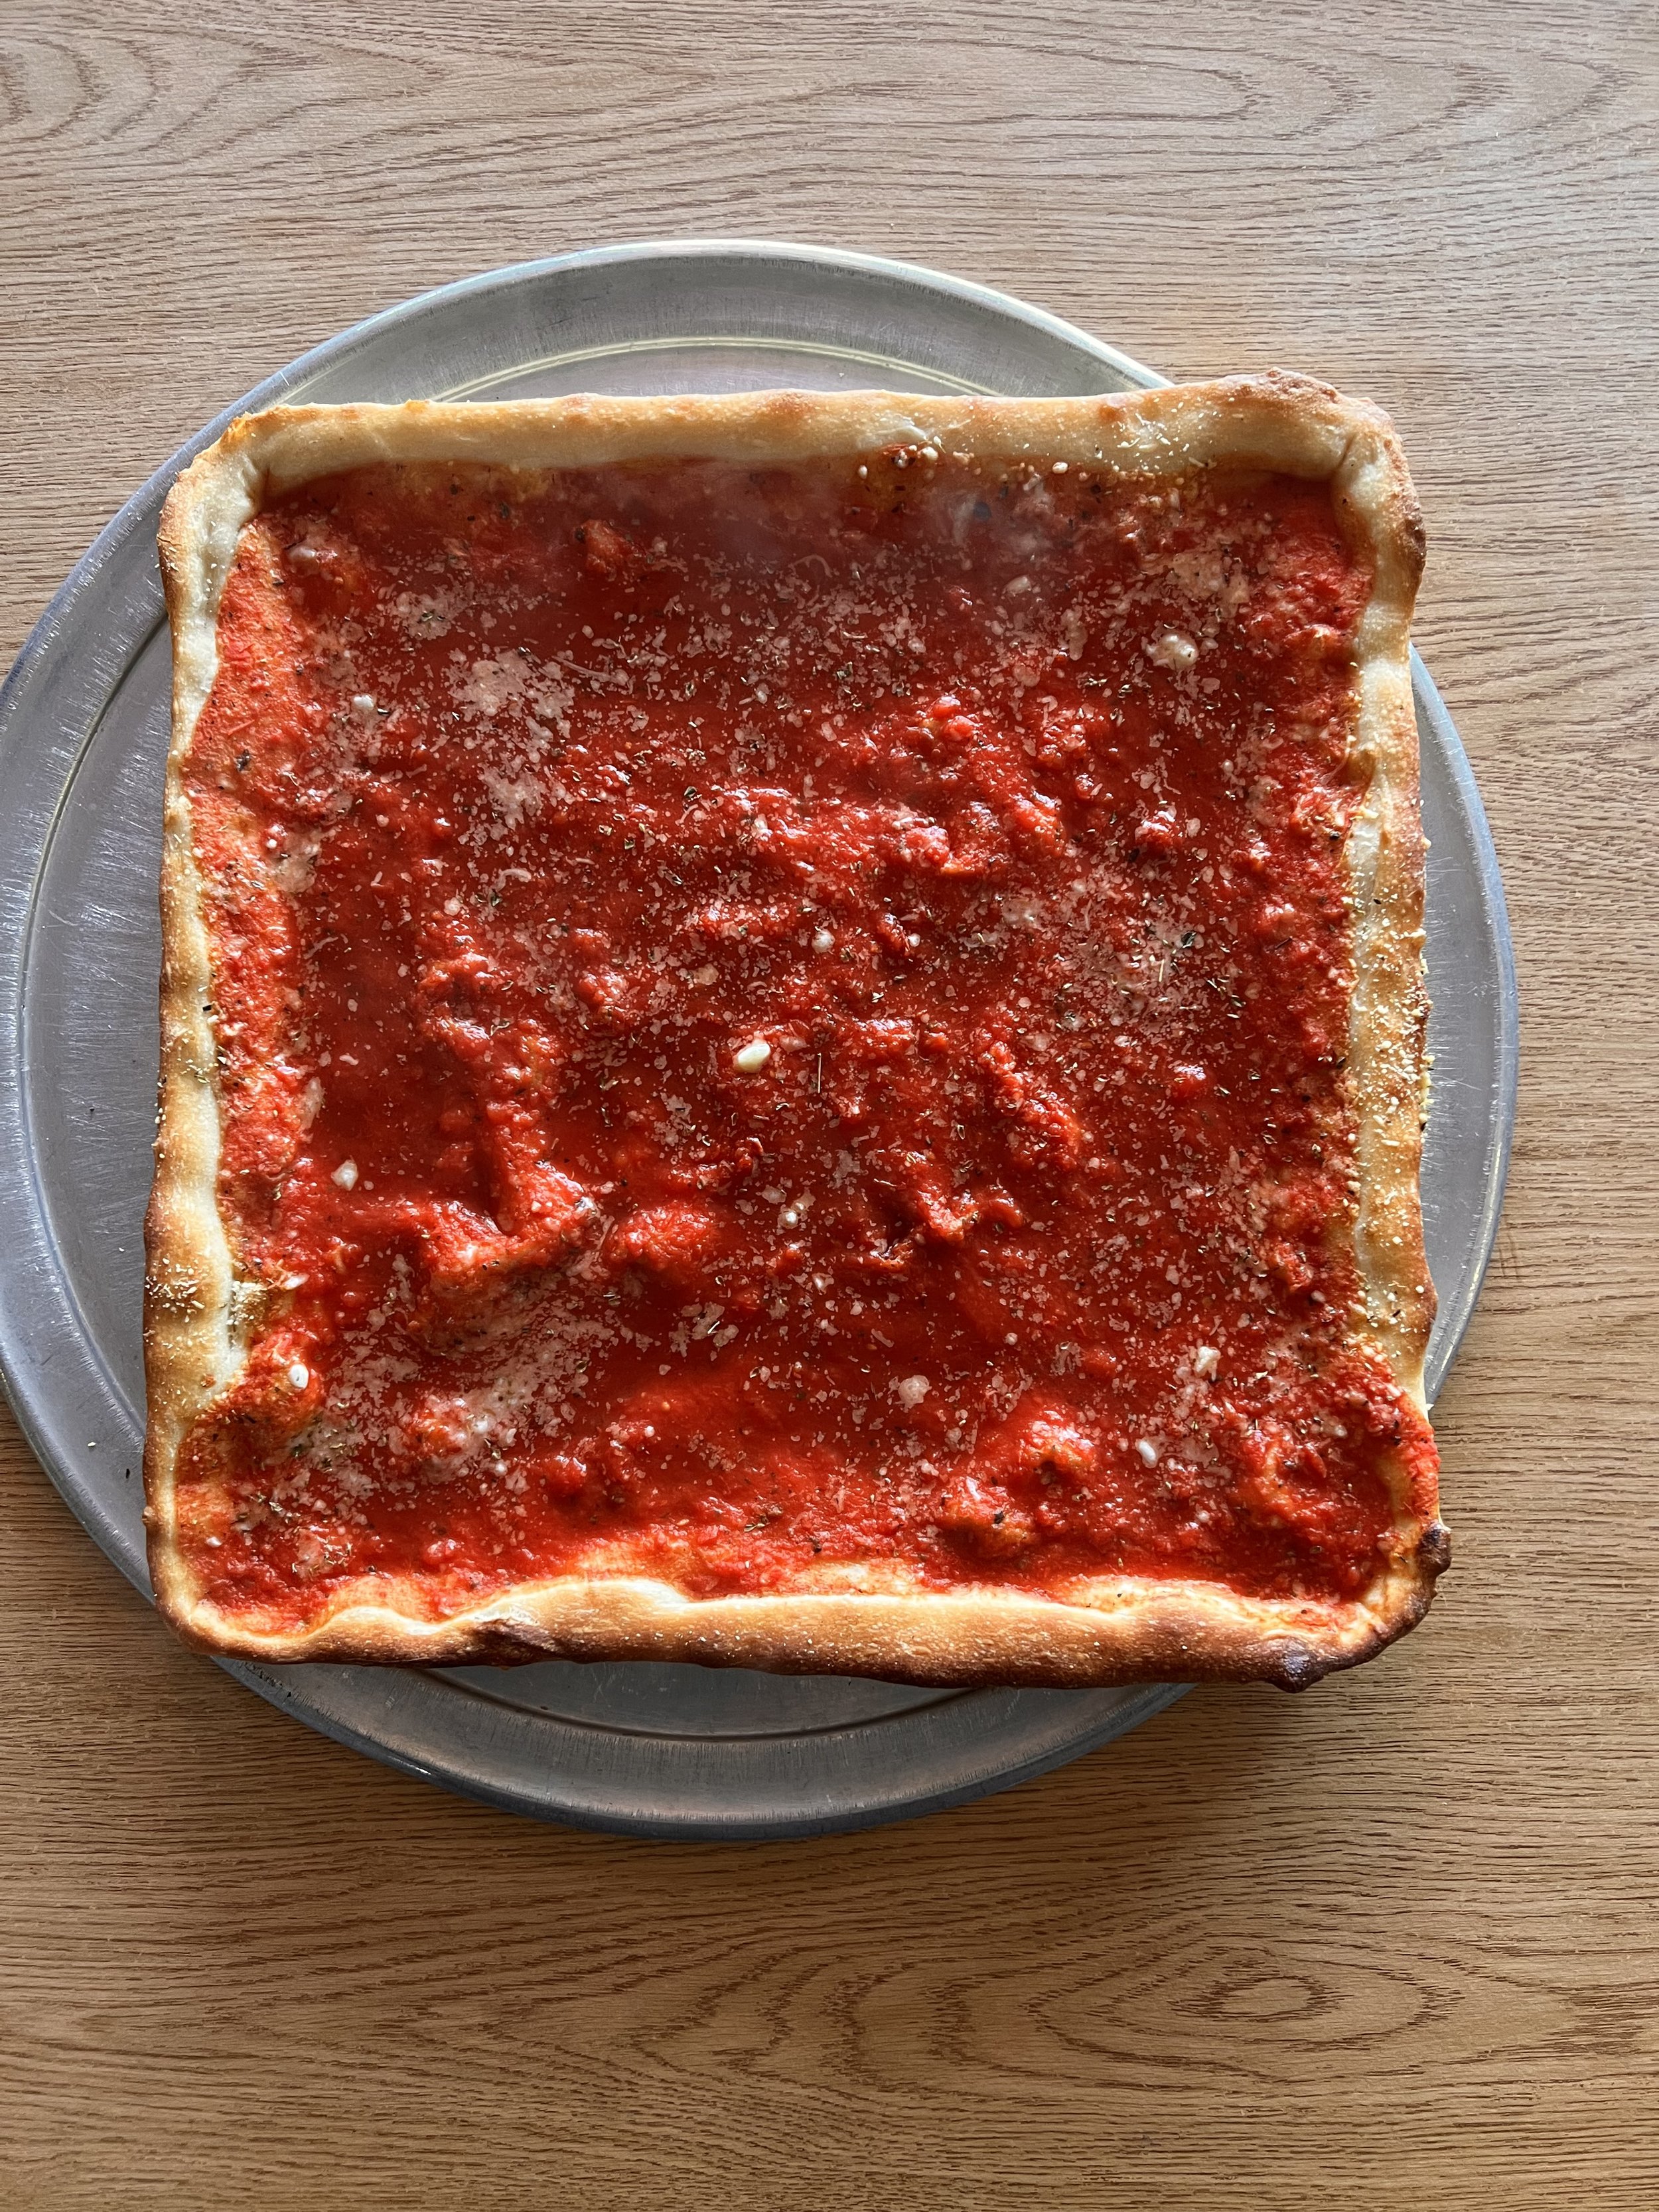   Nonna Tomato Pie   If you love our pizza sauce, you should try our Nonna Tomato Pie 